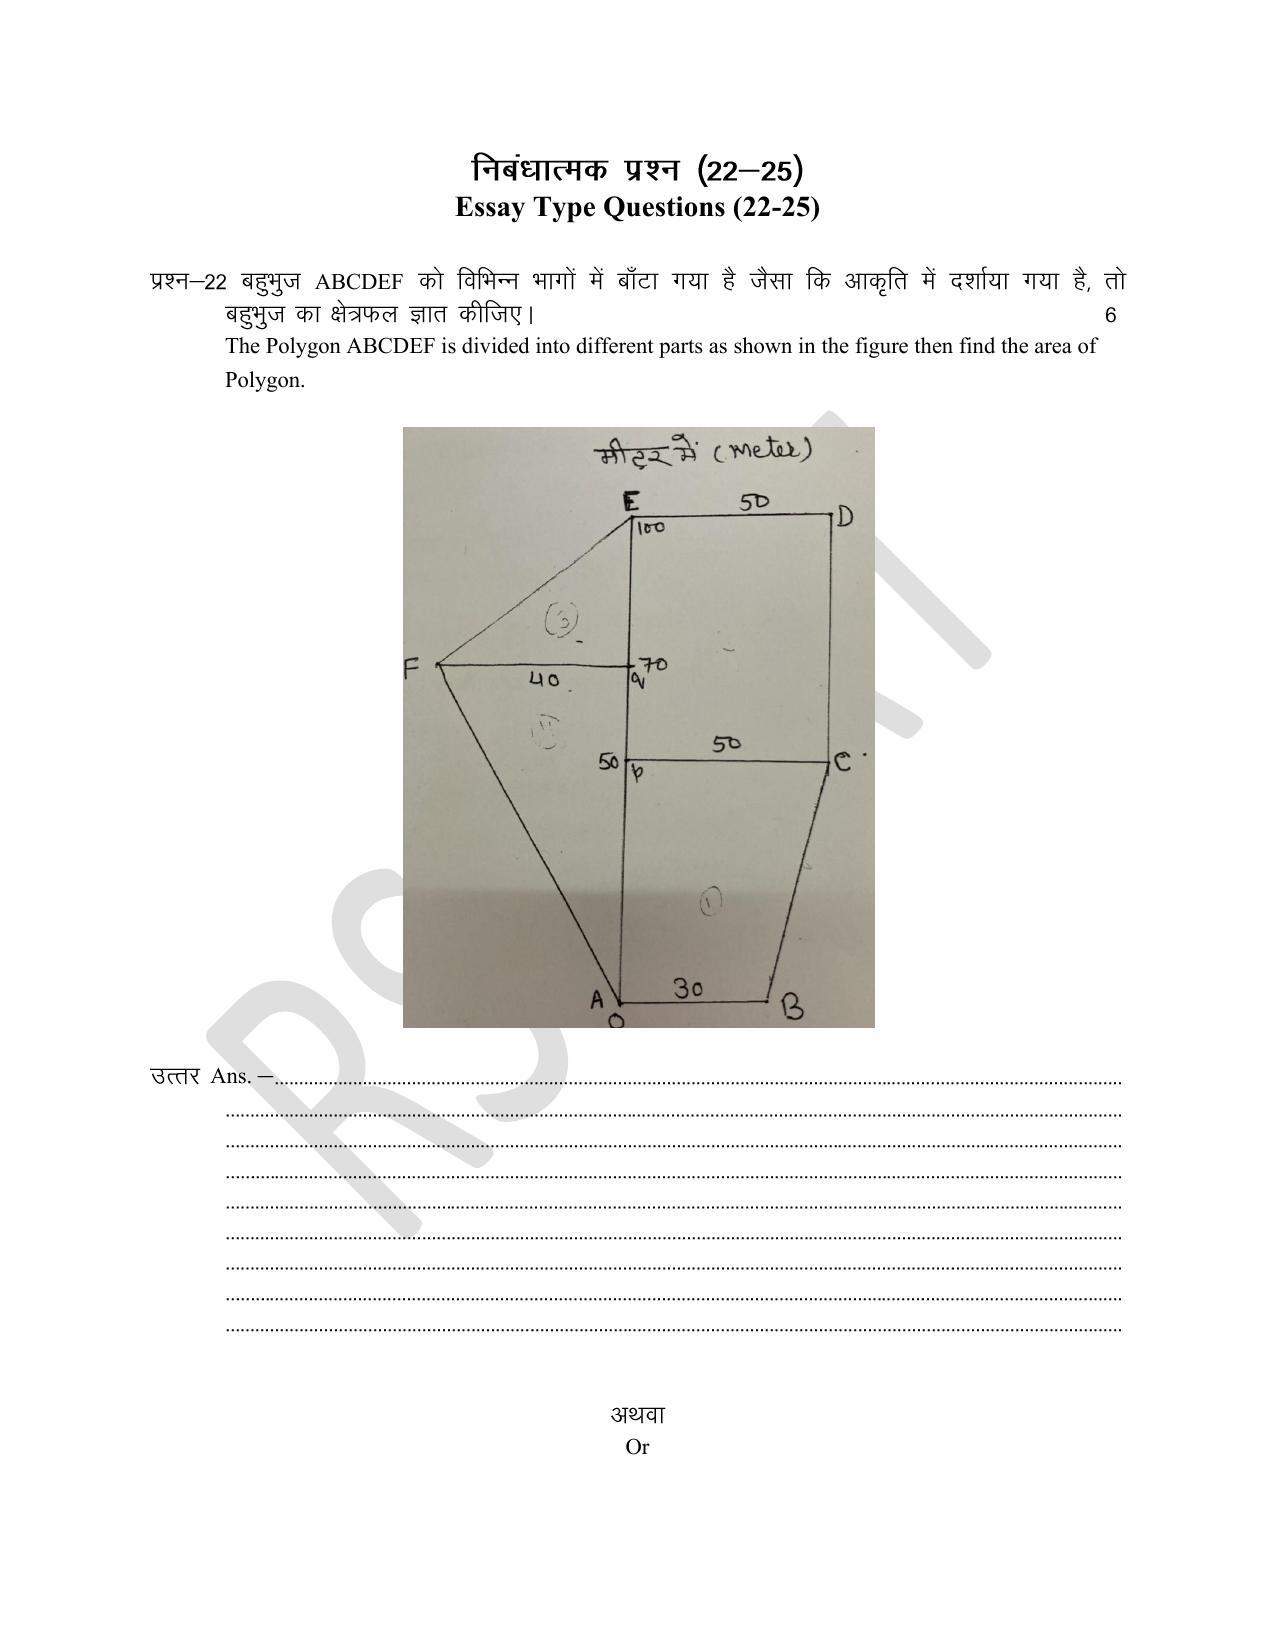 RBSE Class 8 Math & Science Sample Paper 2023 - Page 8